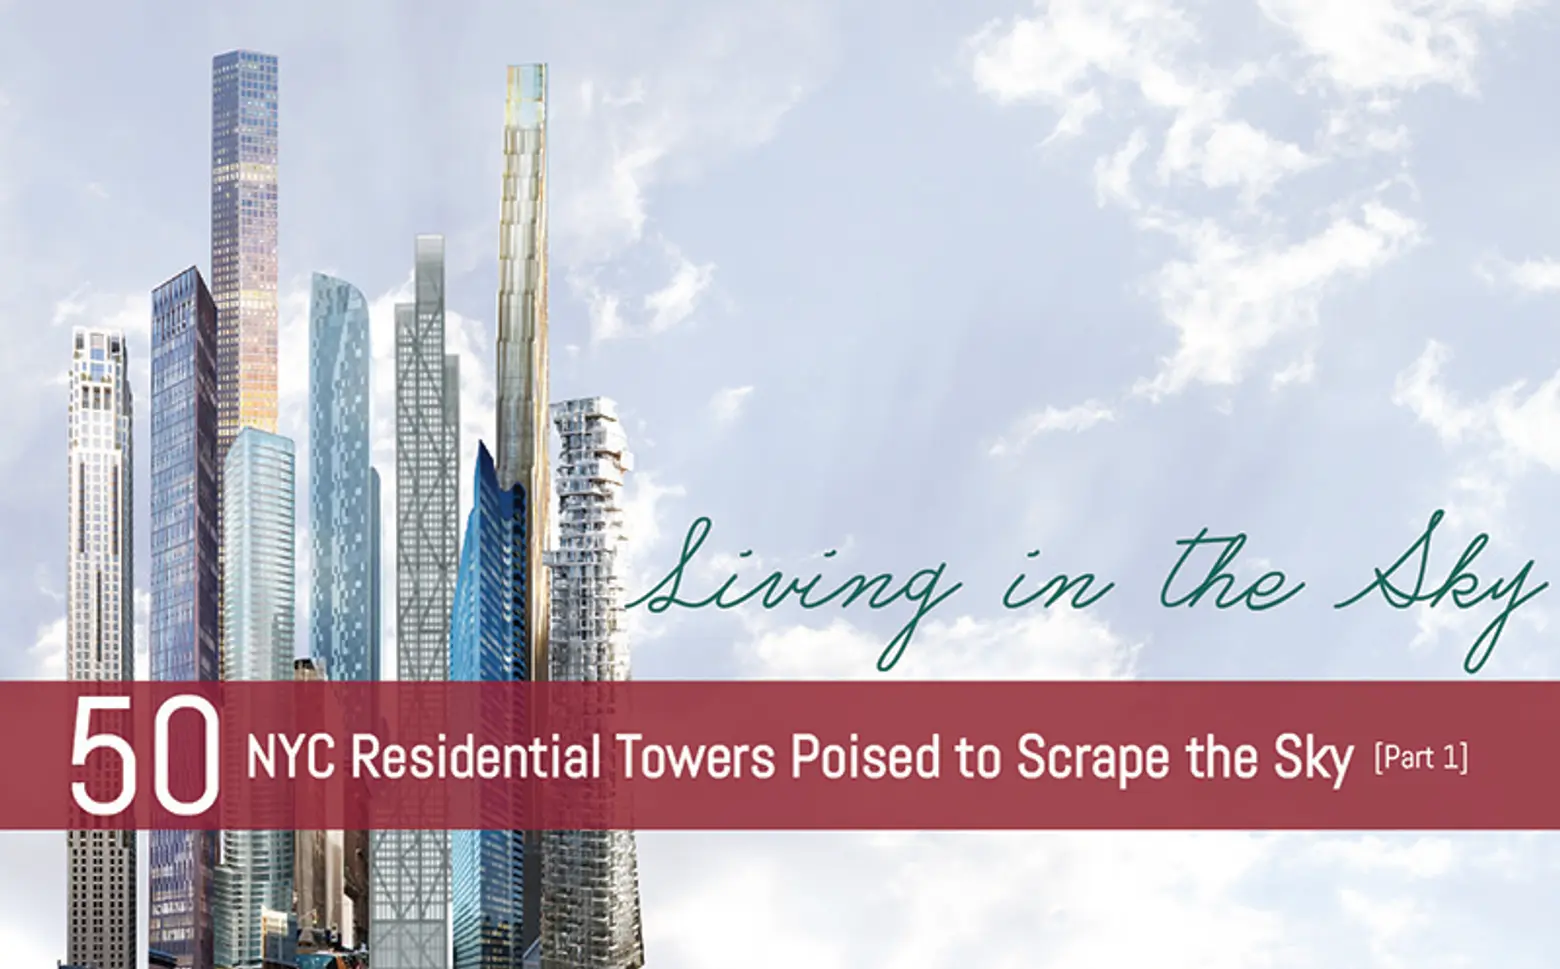 <b>Living in the Clouds: 50 New York Residential Towers Poised to Scrape the Sky (Part I)</b>